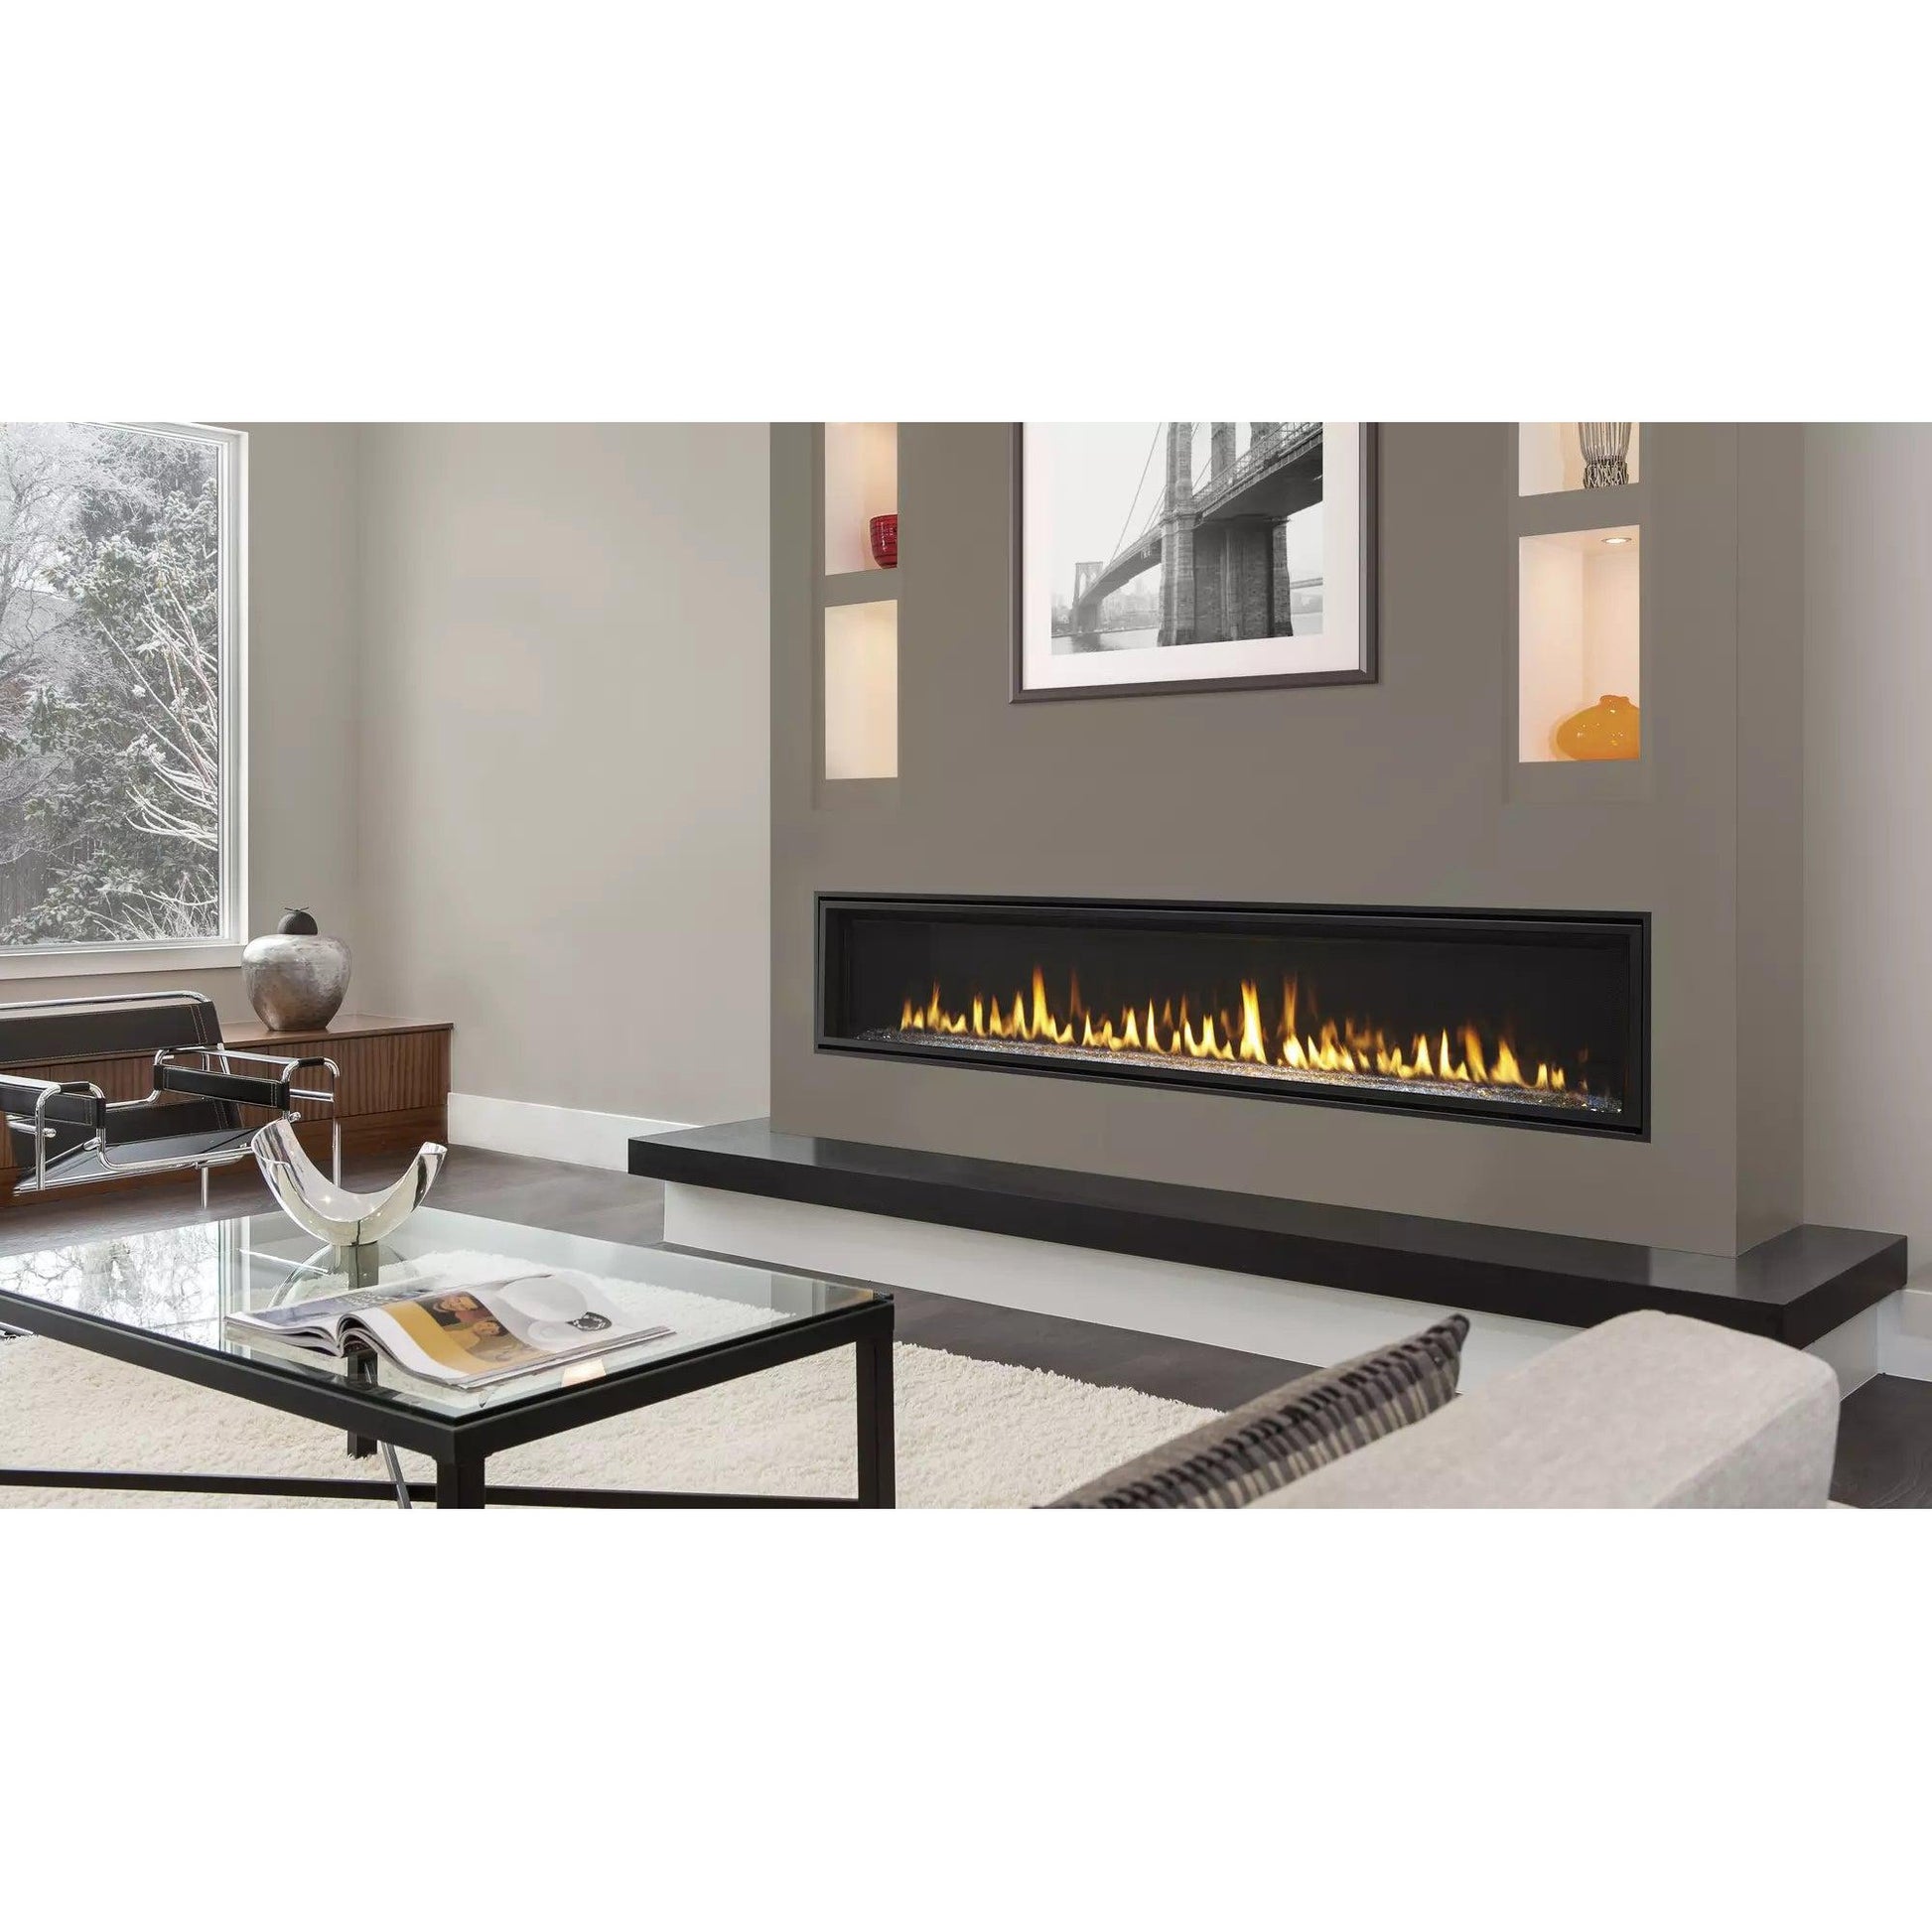 Majestic Echelon II 60 Top Direct Vent Fireplace with IntelliFire Plus Ignition System (NG) - ECHEL60IN